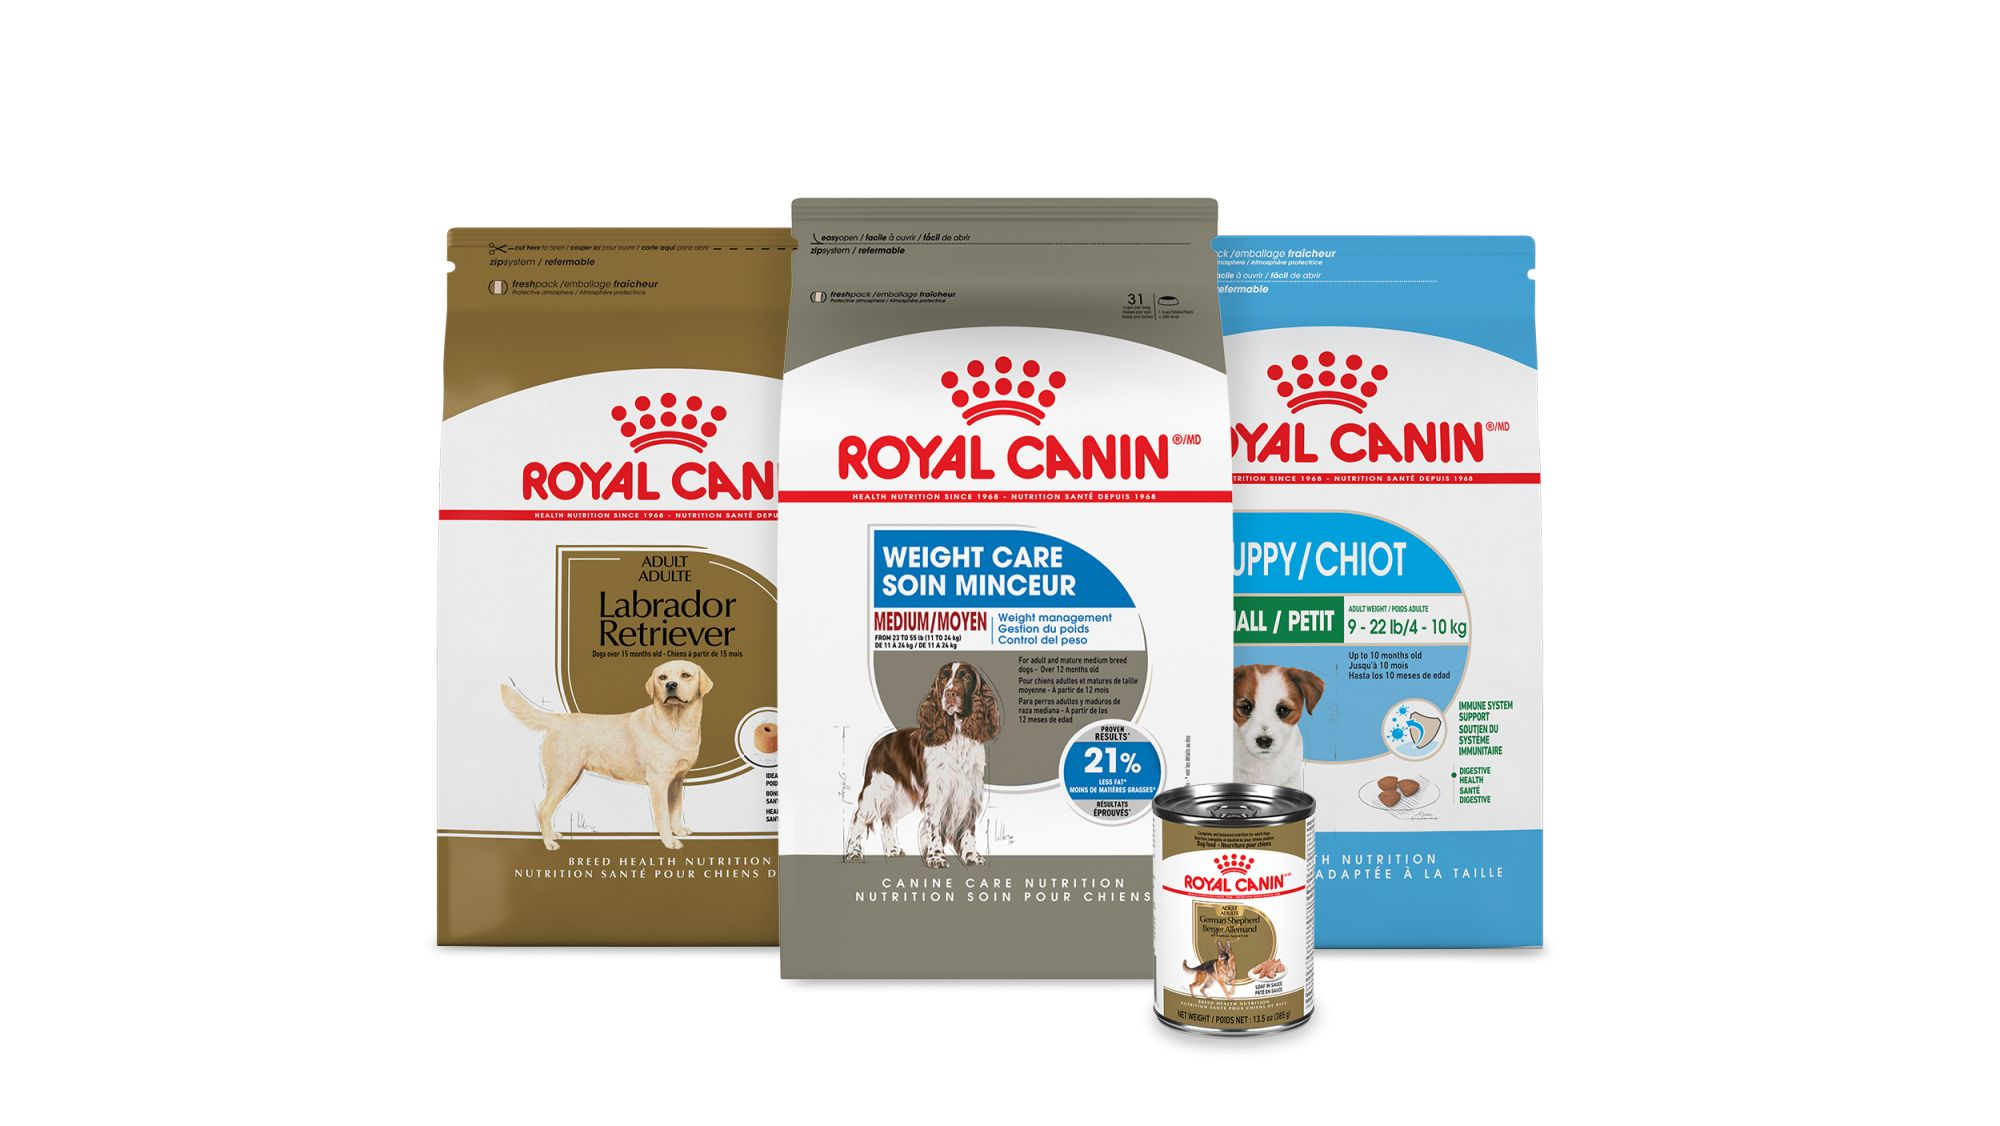 Royal Canin packages for mixed breed dog